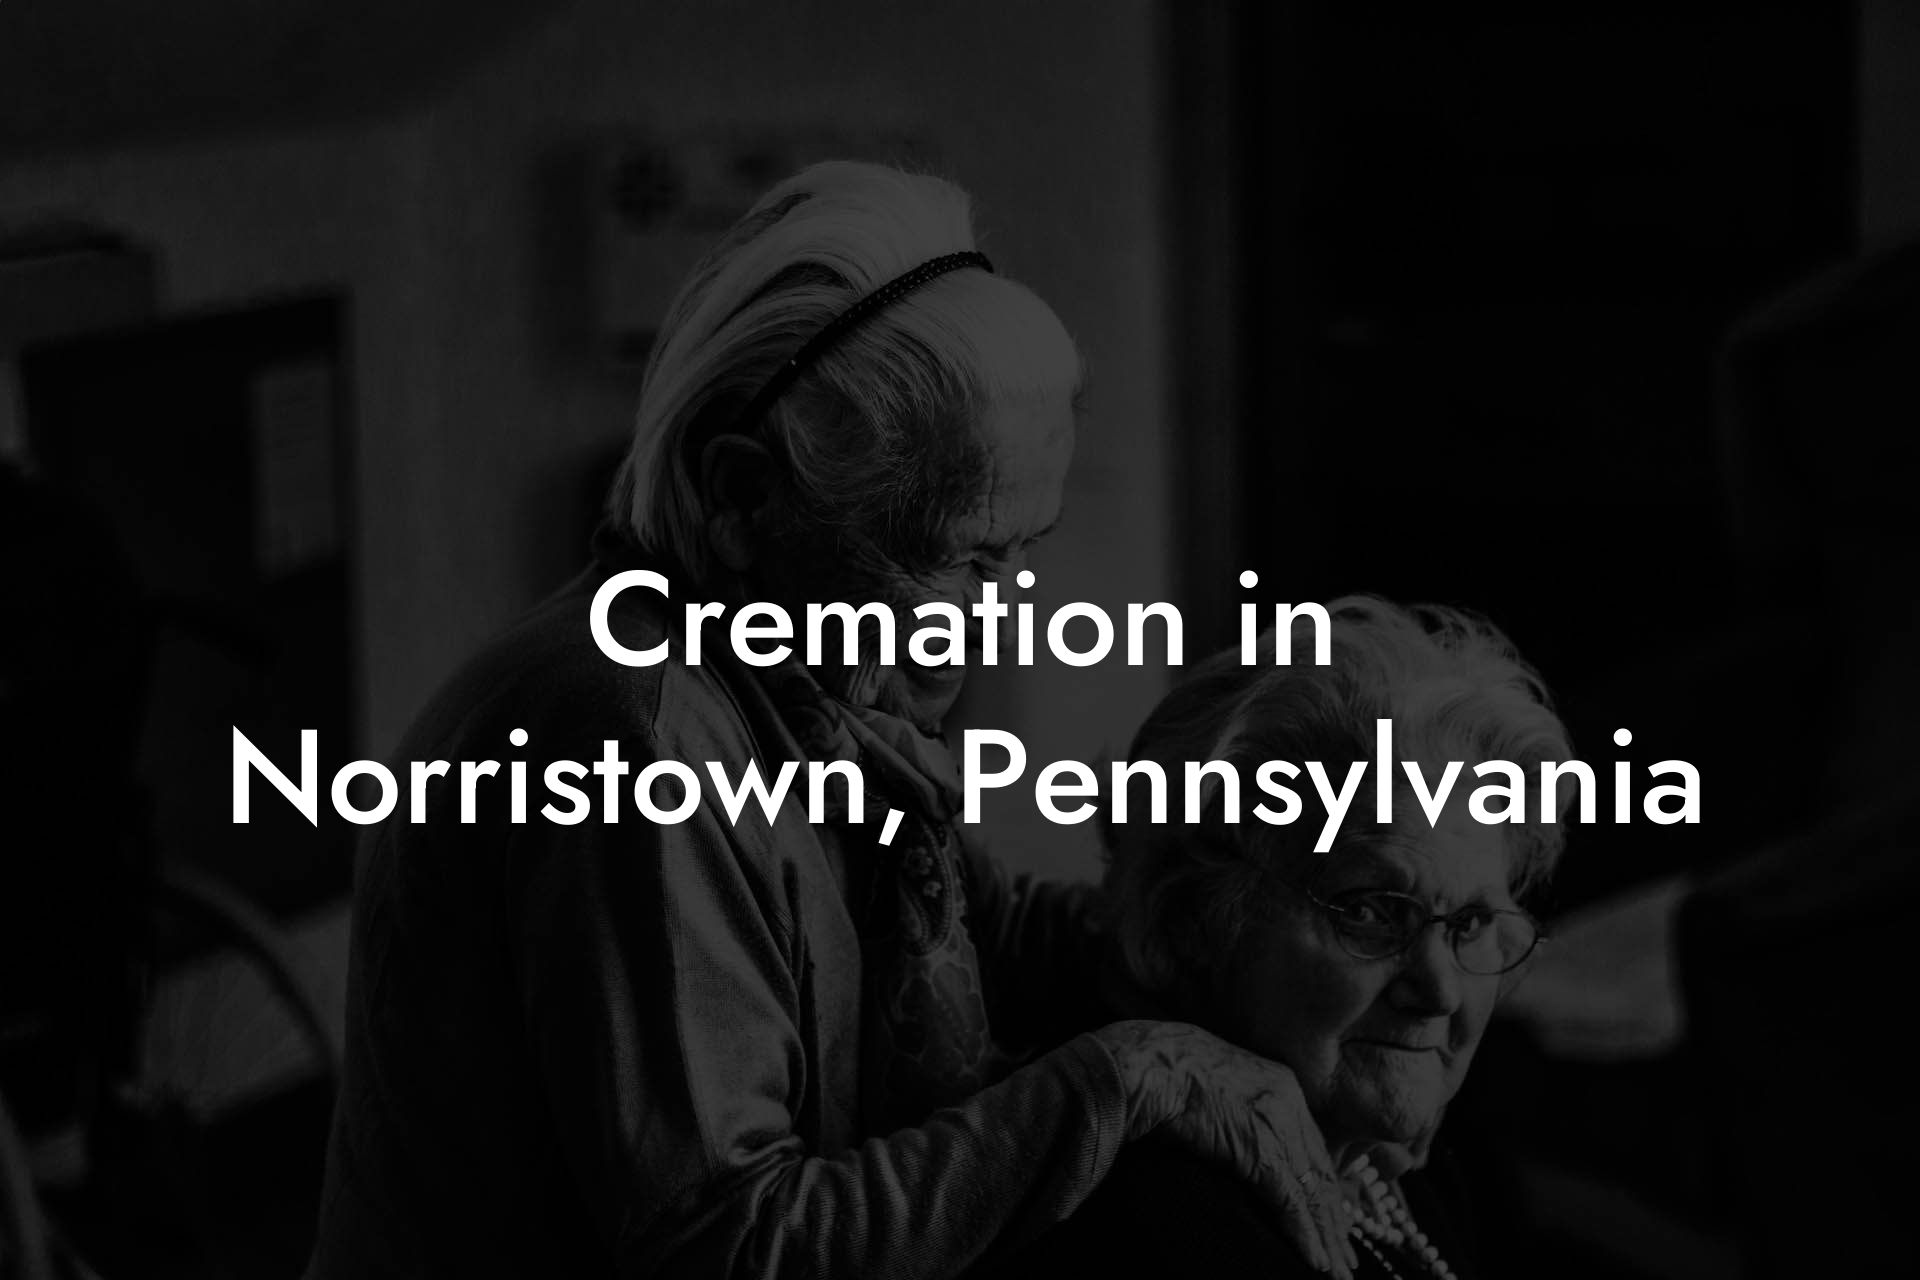 Cremation in Norristown, Pennsylvania